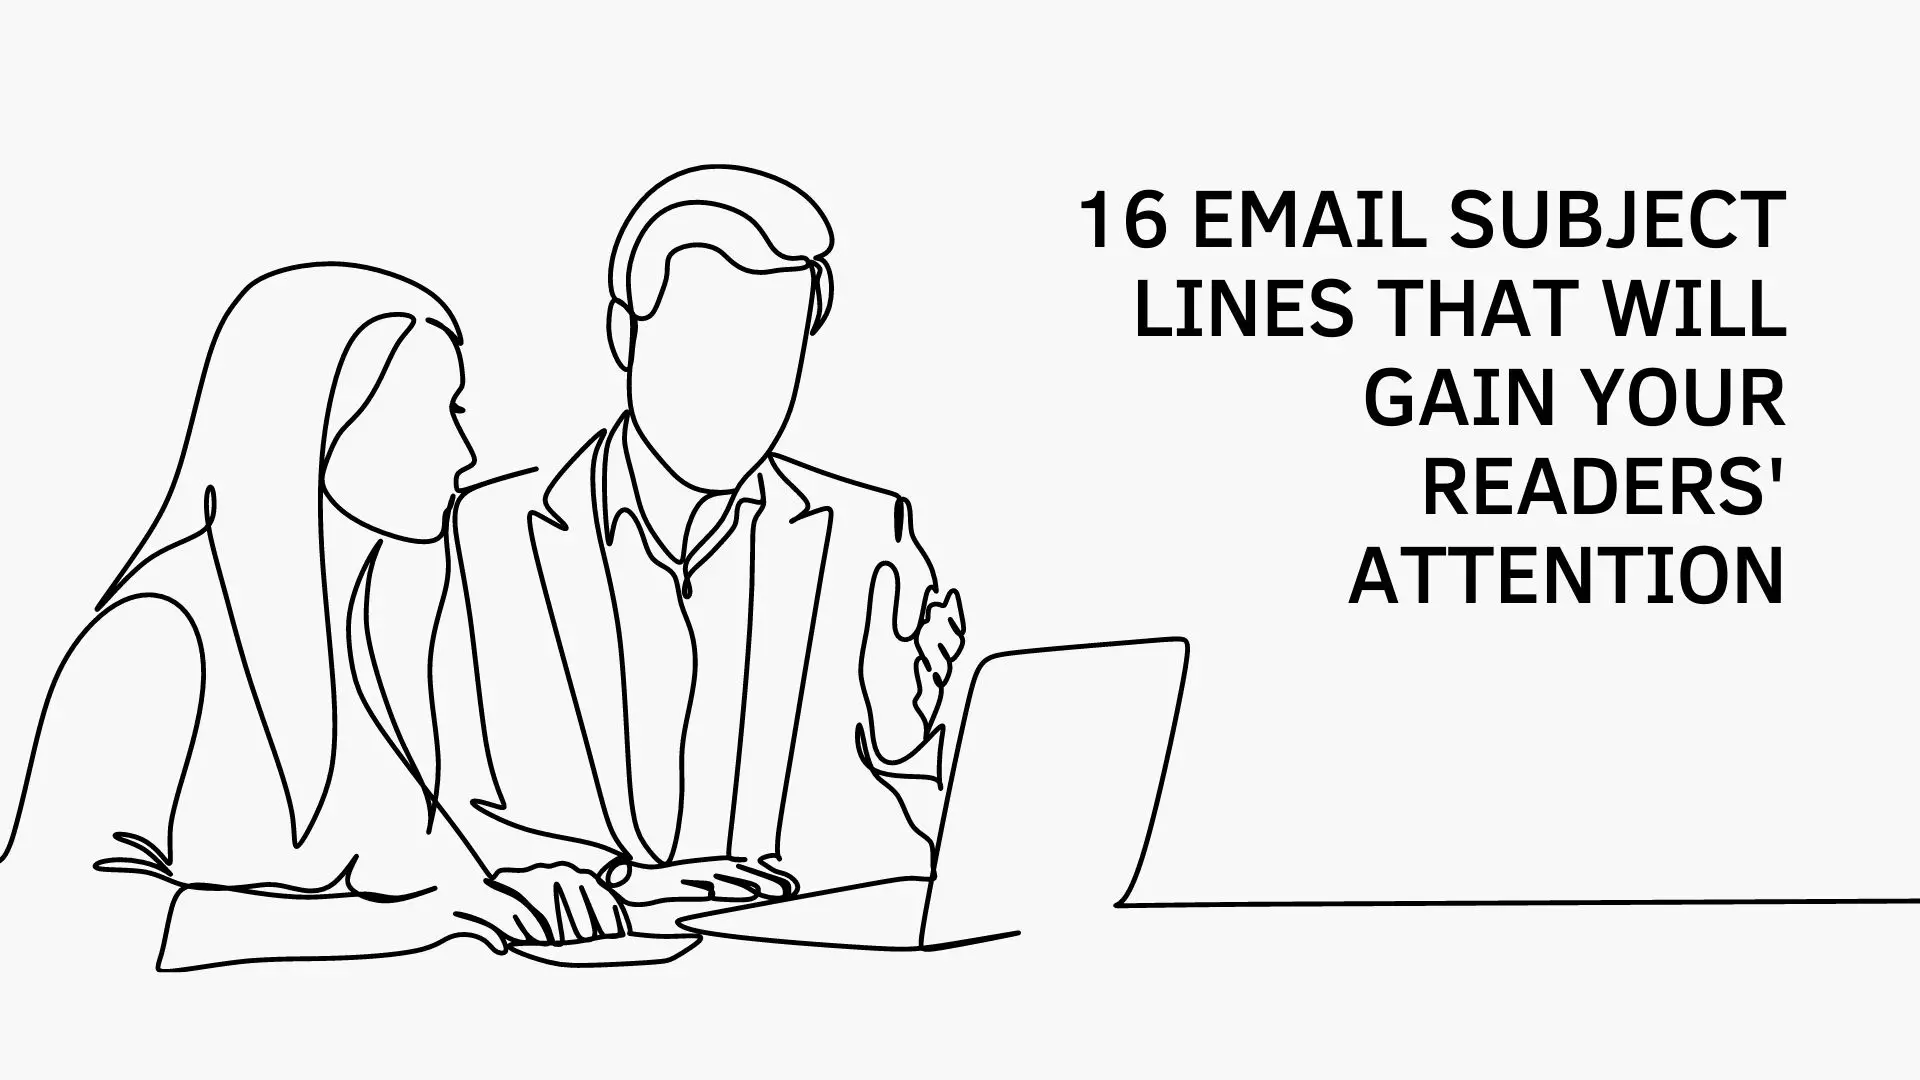 16 Email Subject Lines That Will Gain Your Readers' Attention